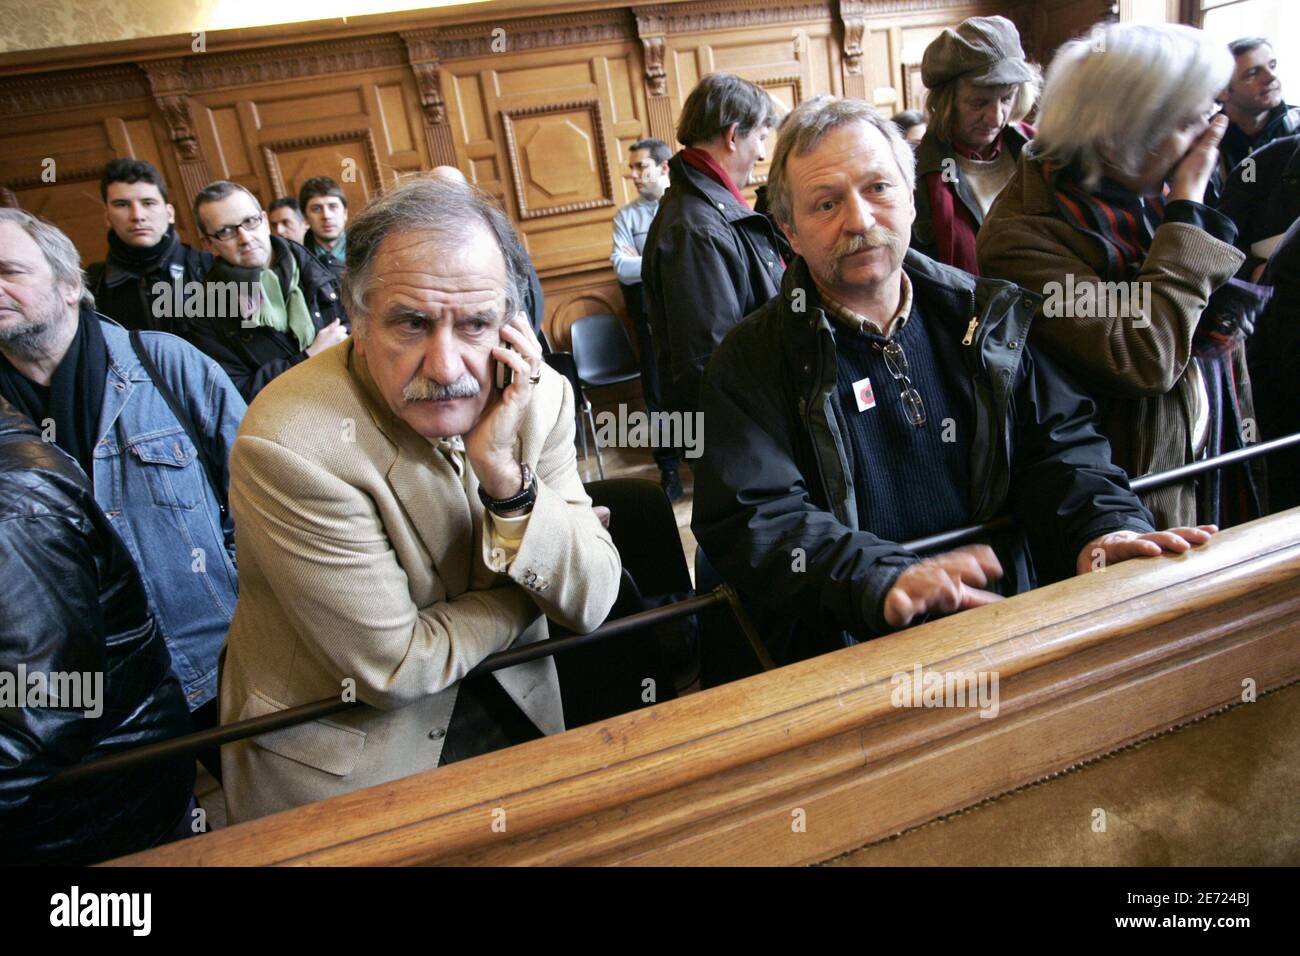 Jose Bove and Noel Mamere appear at Paris court on february 7, 2007. The appeals court upheld a verdict and four-month jail sentence for French farmer and anti-globalization activist Jose Bove for destroying a field of genetically modified corn. Bove, who wants to run in France's presidential elections this year, was sentenced in 2005 for destroying a field of corn planted by U.S. seed company Pioneer Hi-Bred. Photo by Thibault Camus/ABACAPRESS.COM Stock Photo